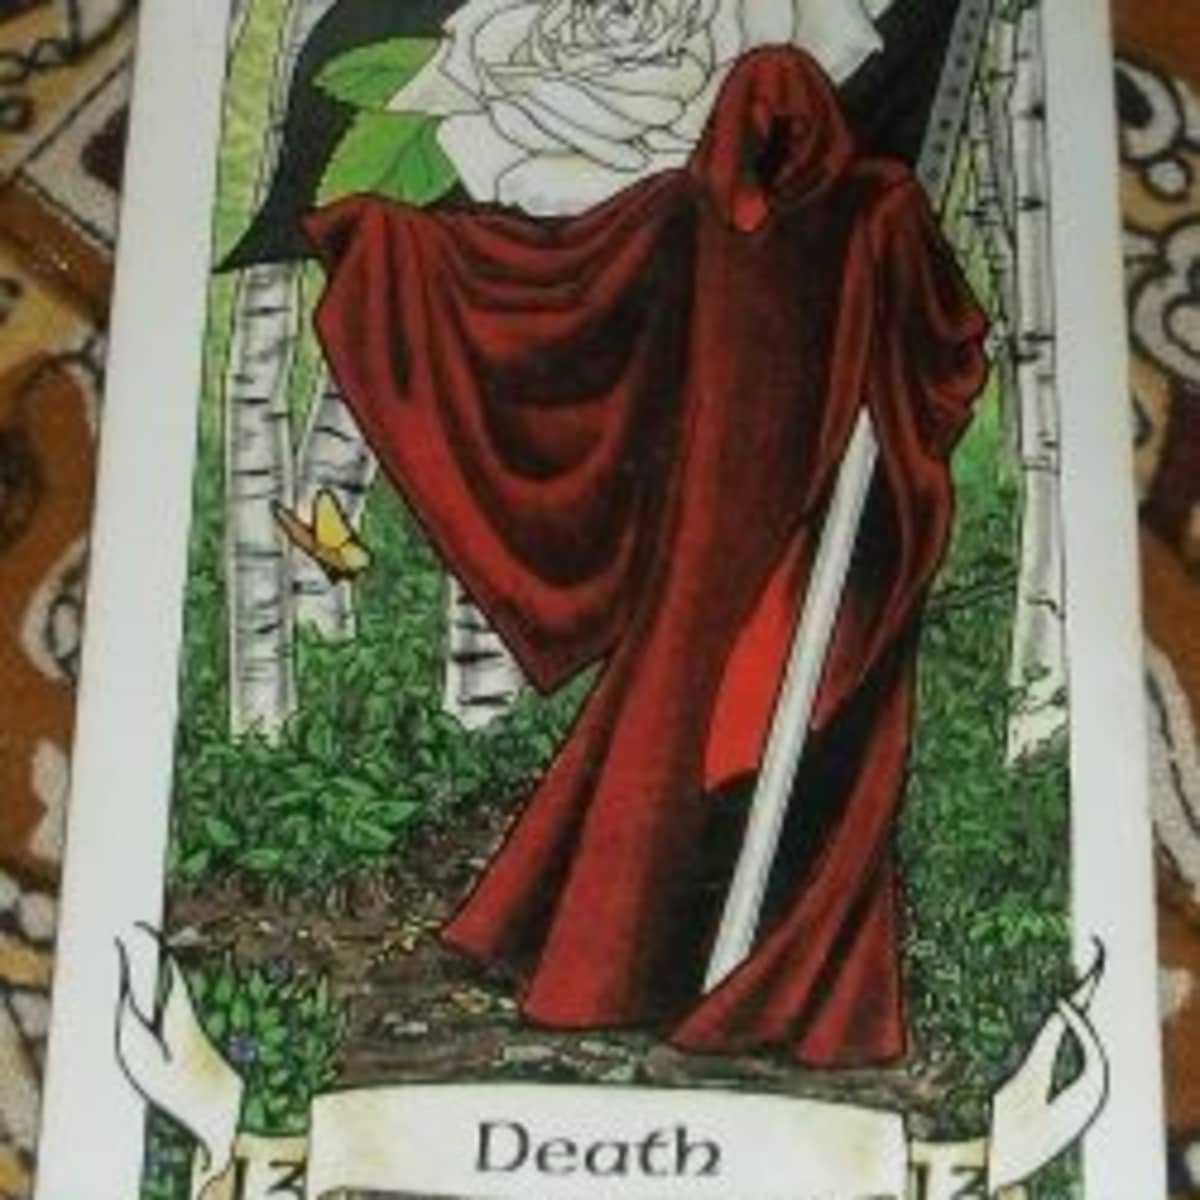 Dr Terror deals the Death card: how tarot was turned into an